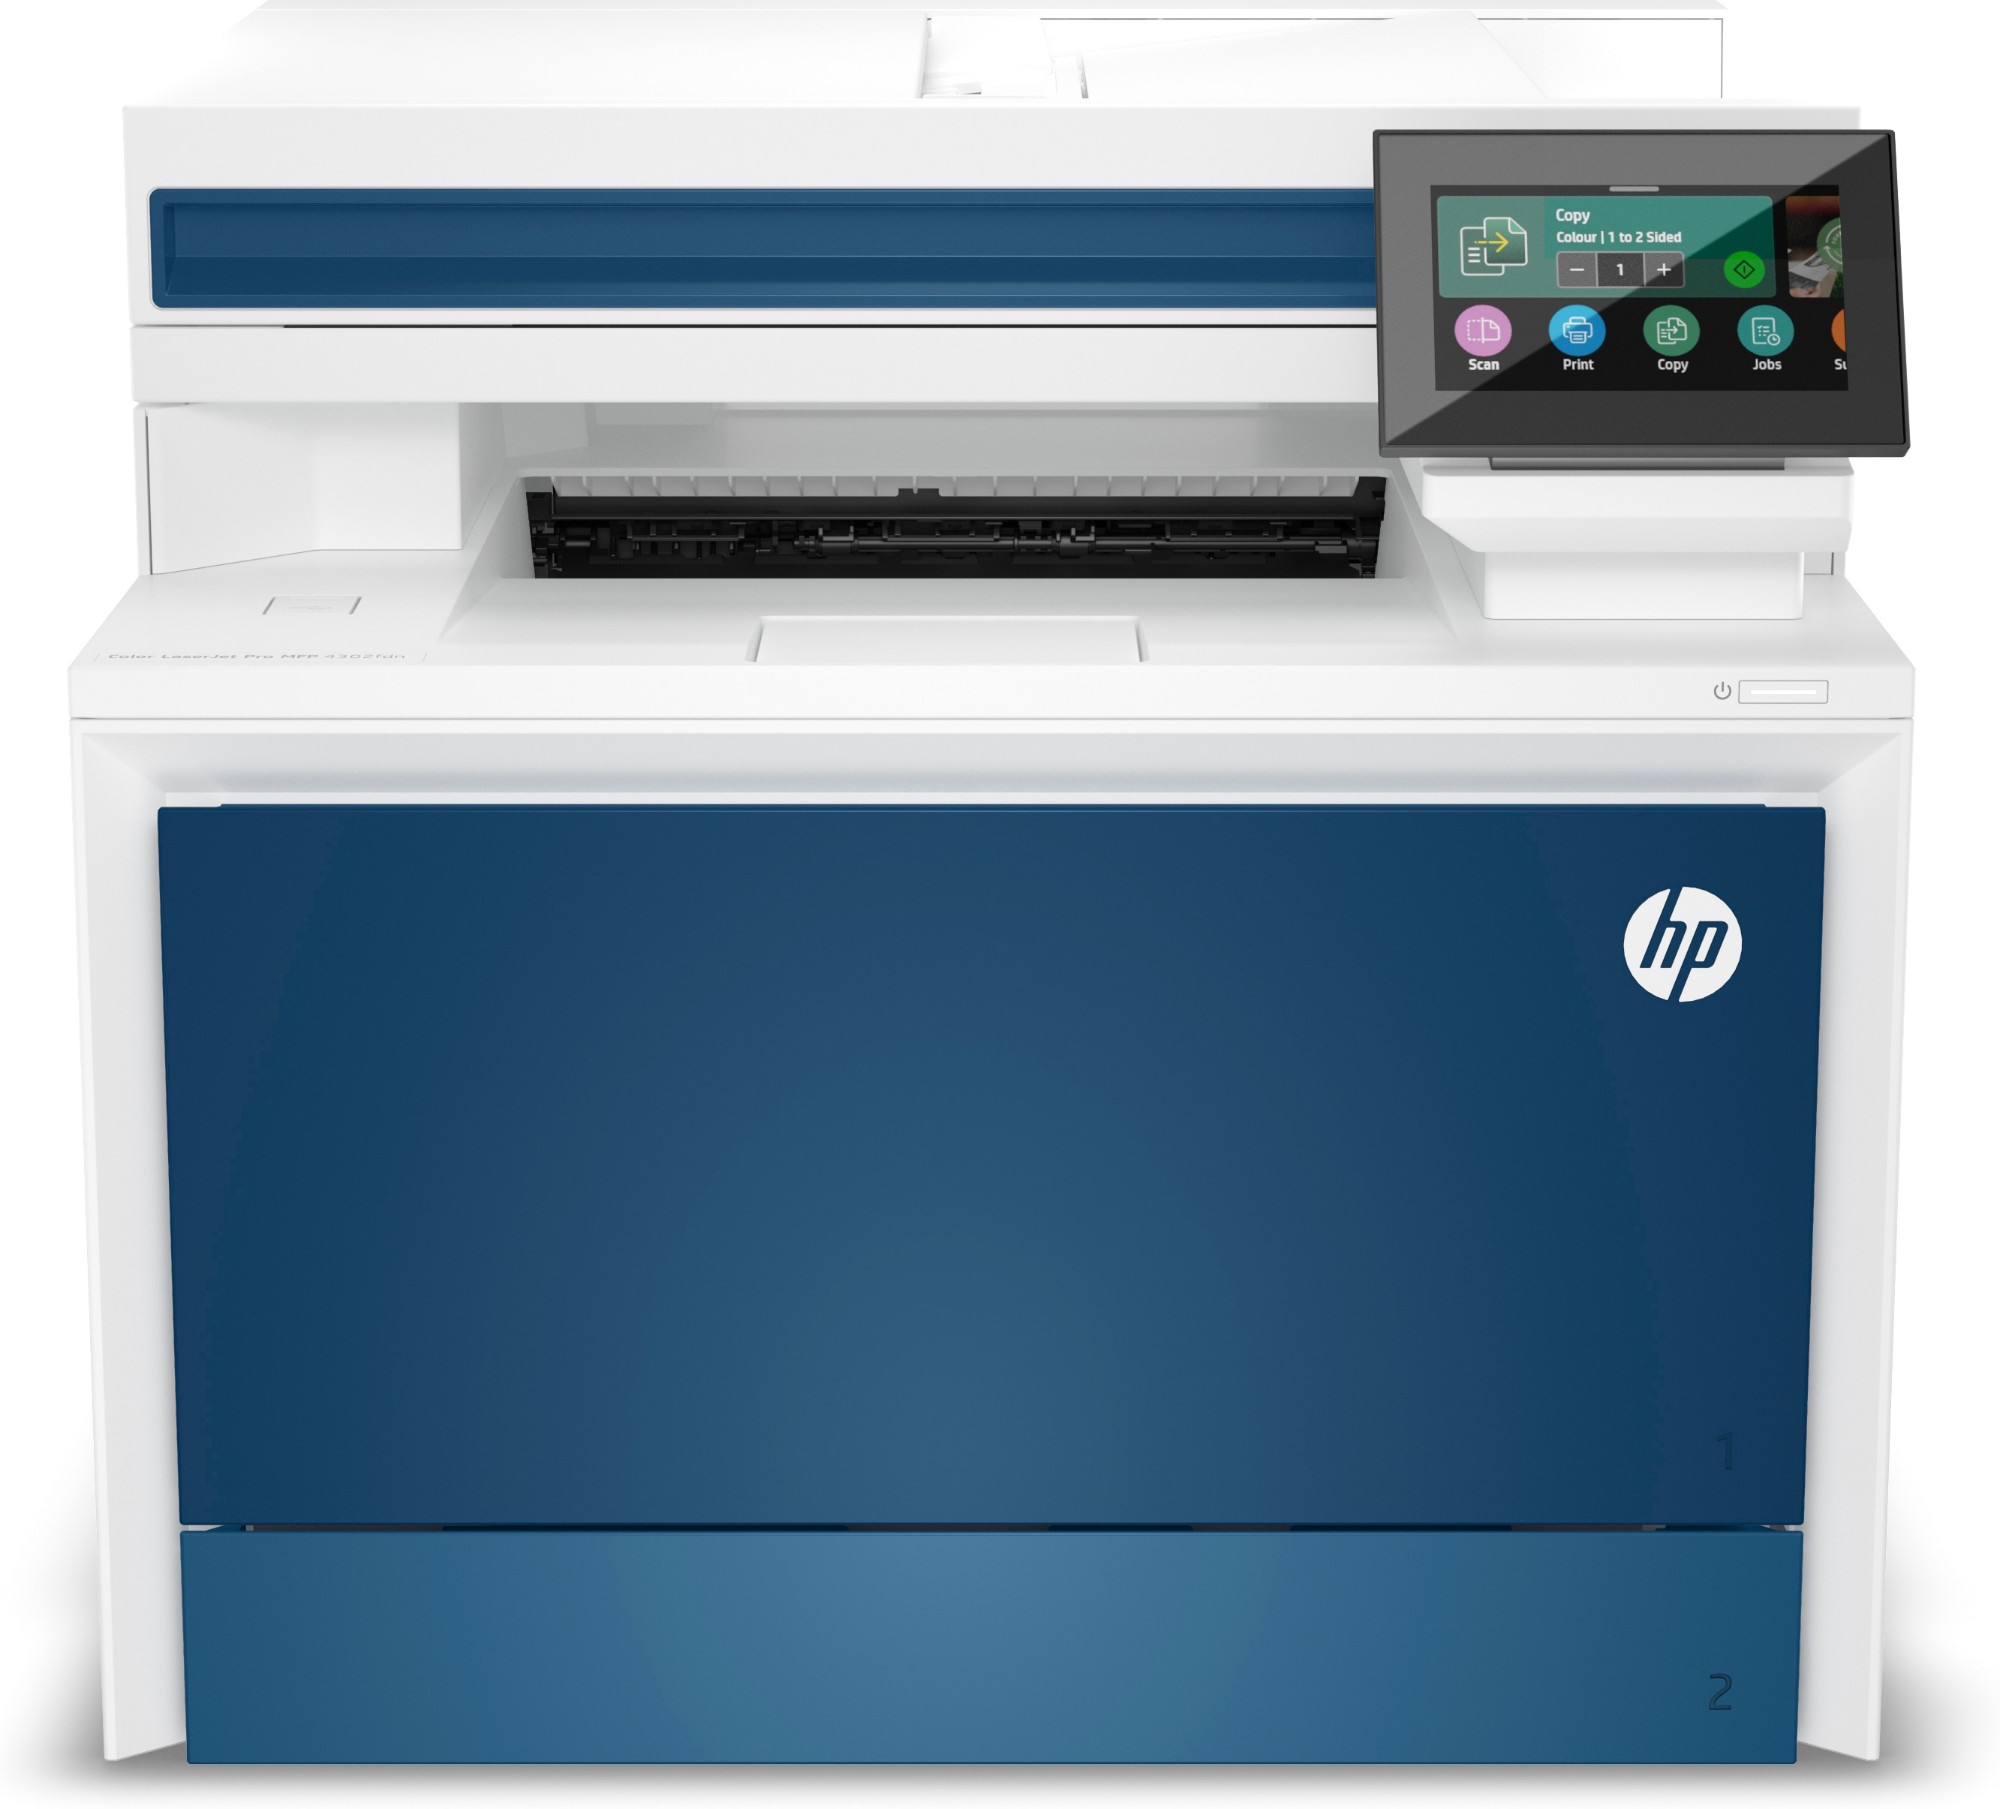 HP Colour LaserJet Pro MFP 4302fdn Printer, Colour, Printer for Small medium business, Print, copy, scan, fax, Print from phone or tablet; Automatic document feeder; Two-sided printing